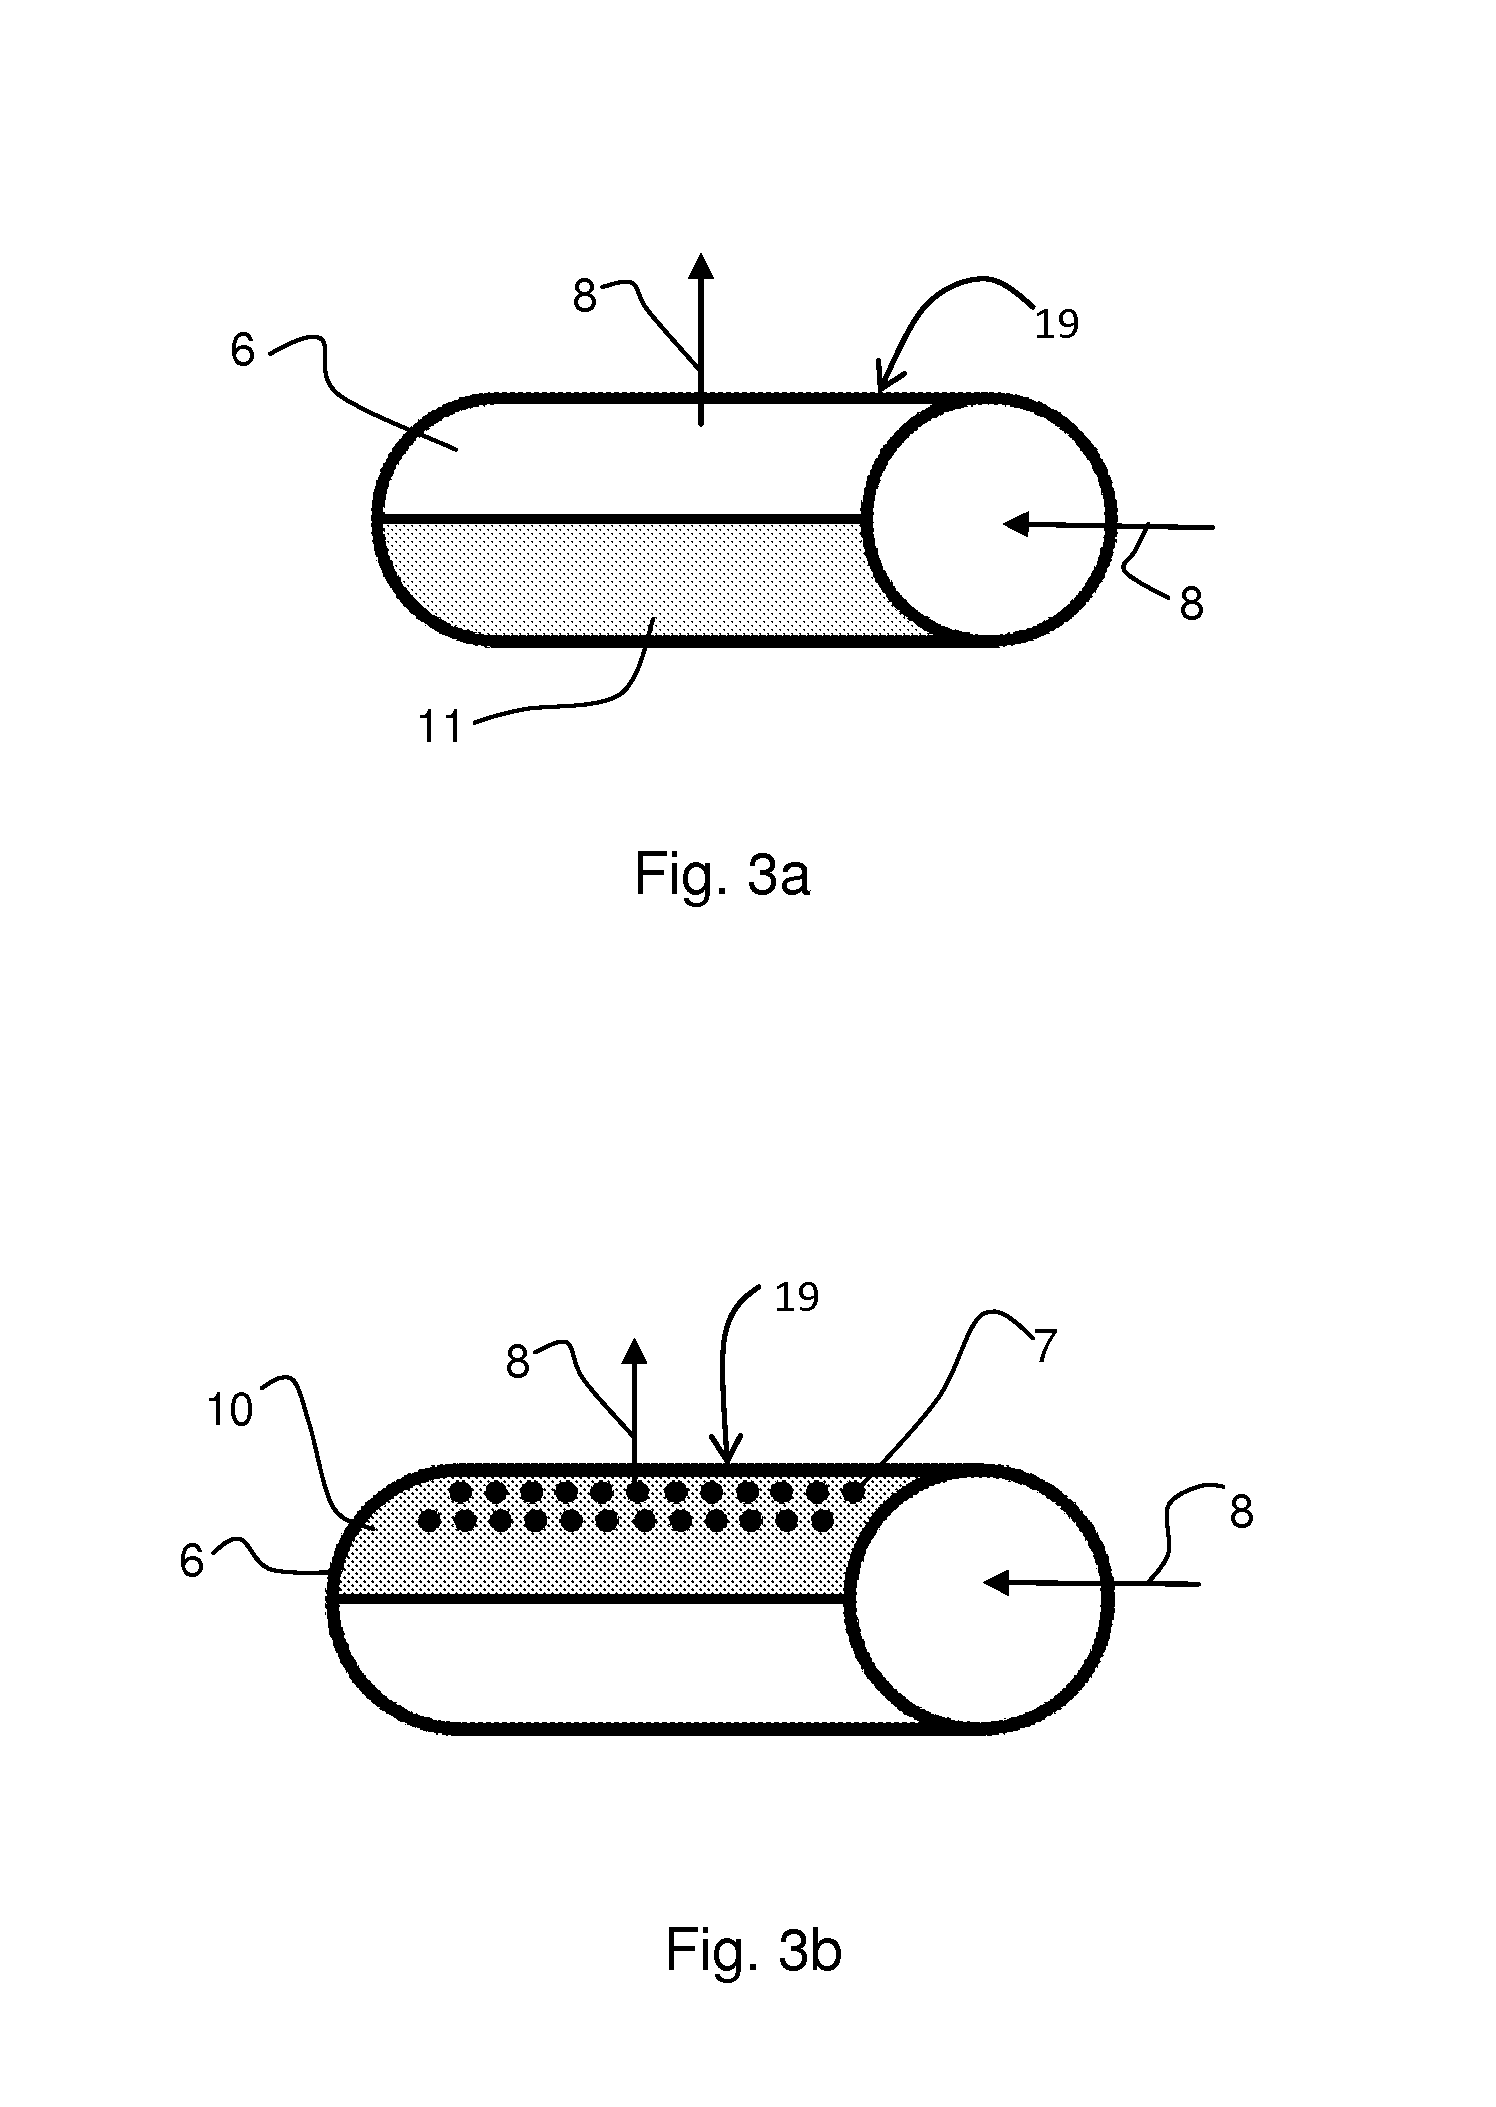 Equipment and method for electrolytic recovery of metal